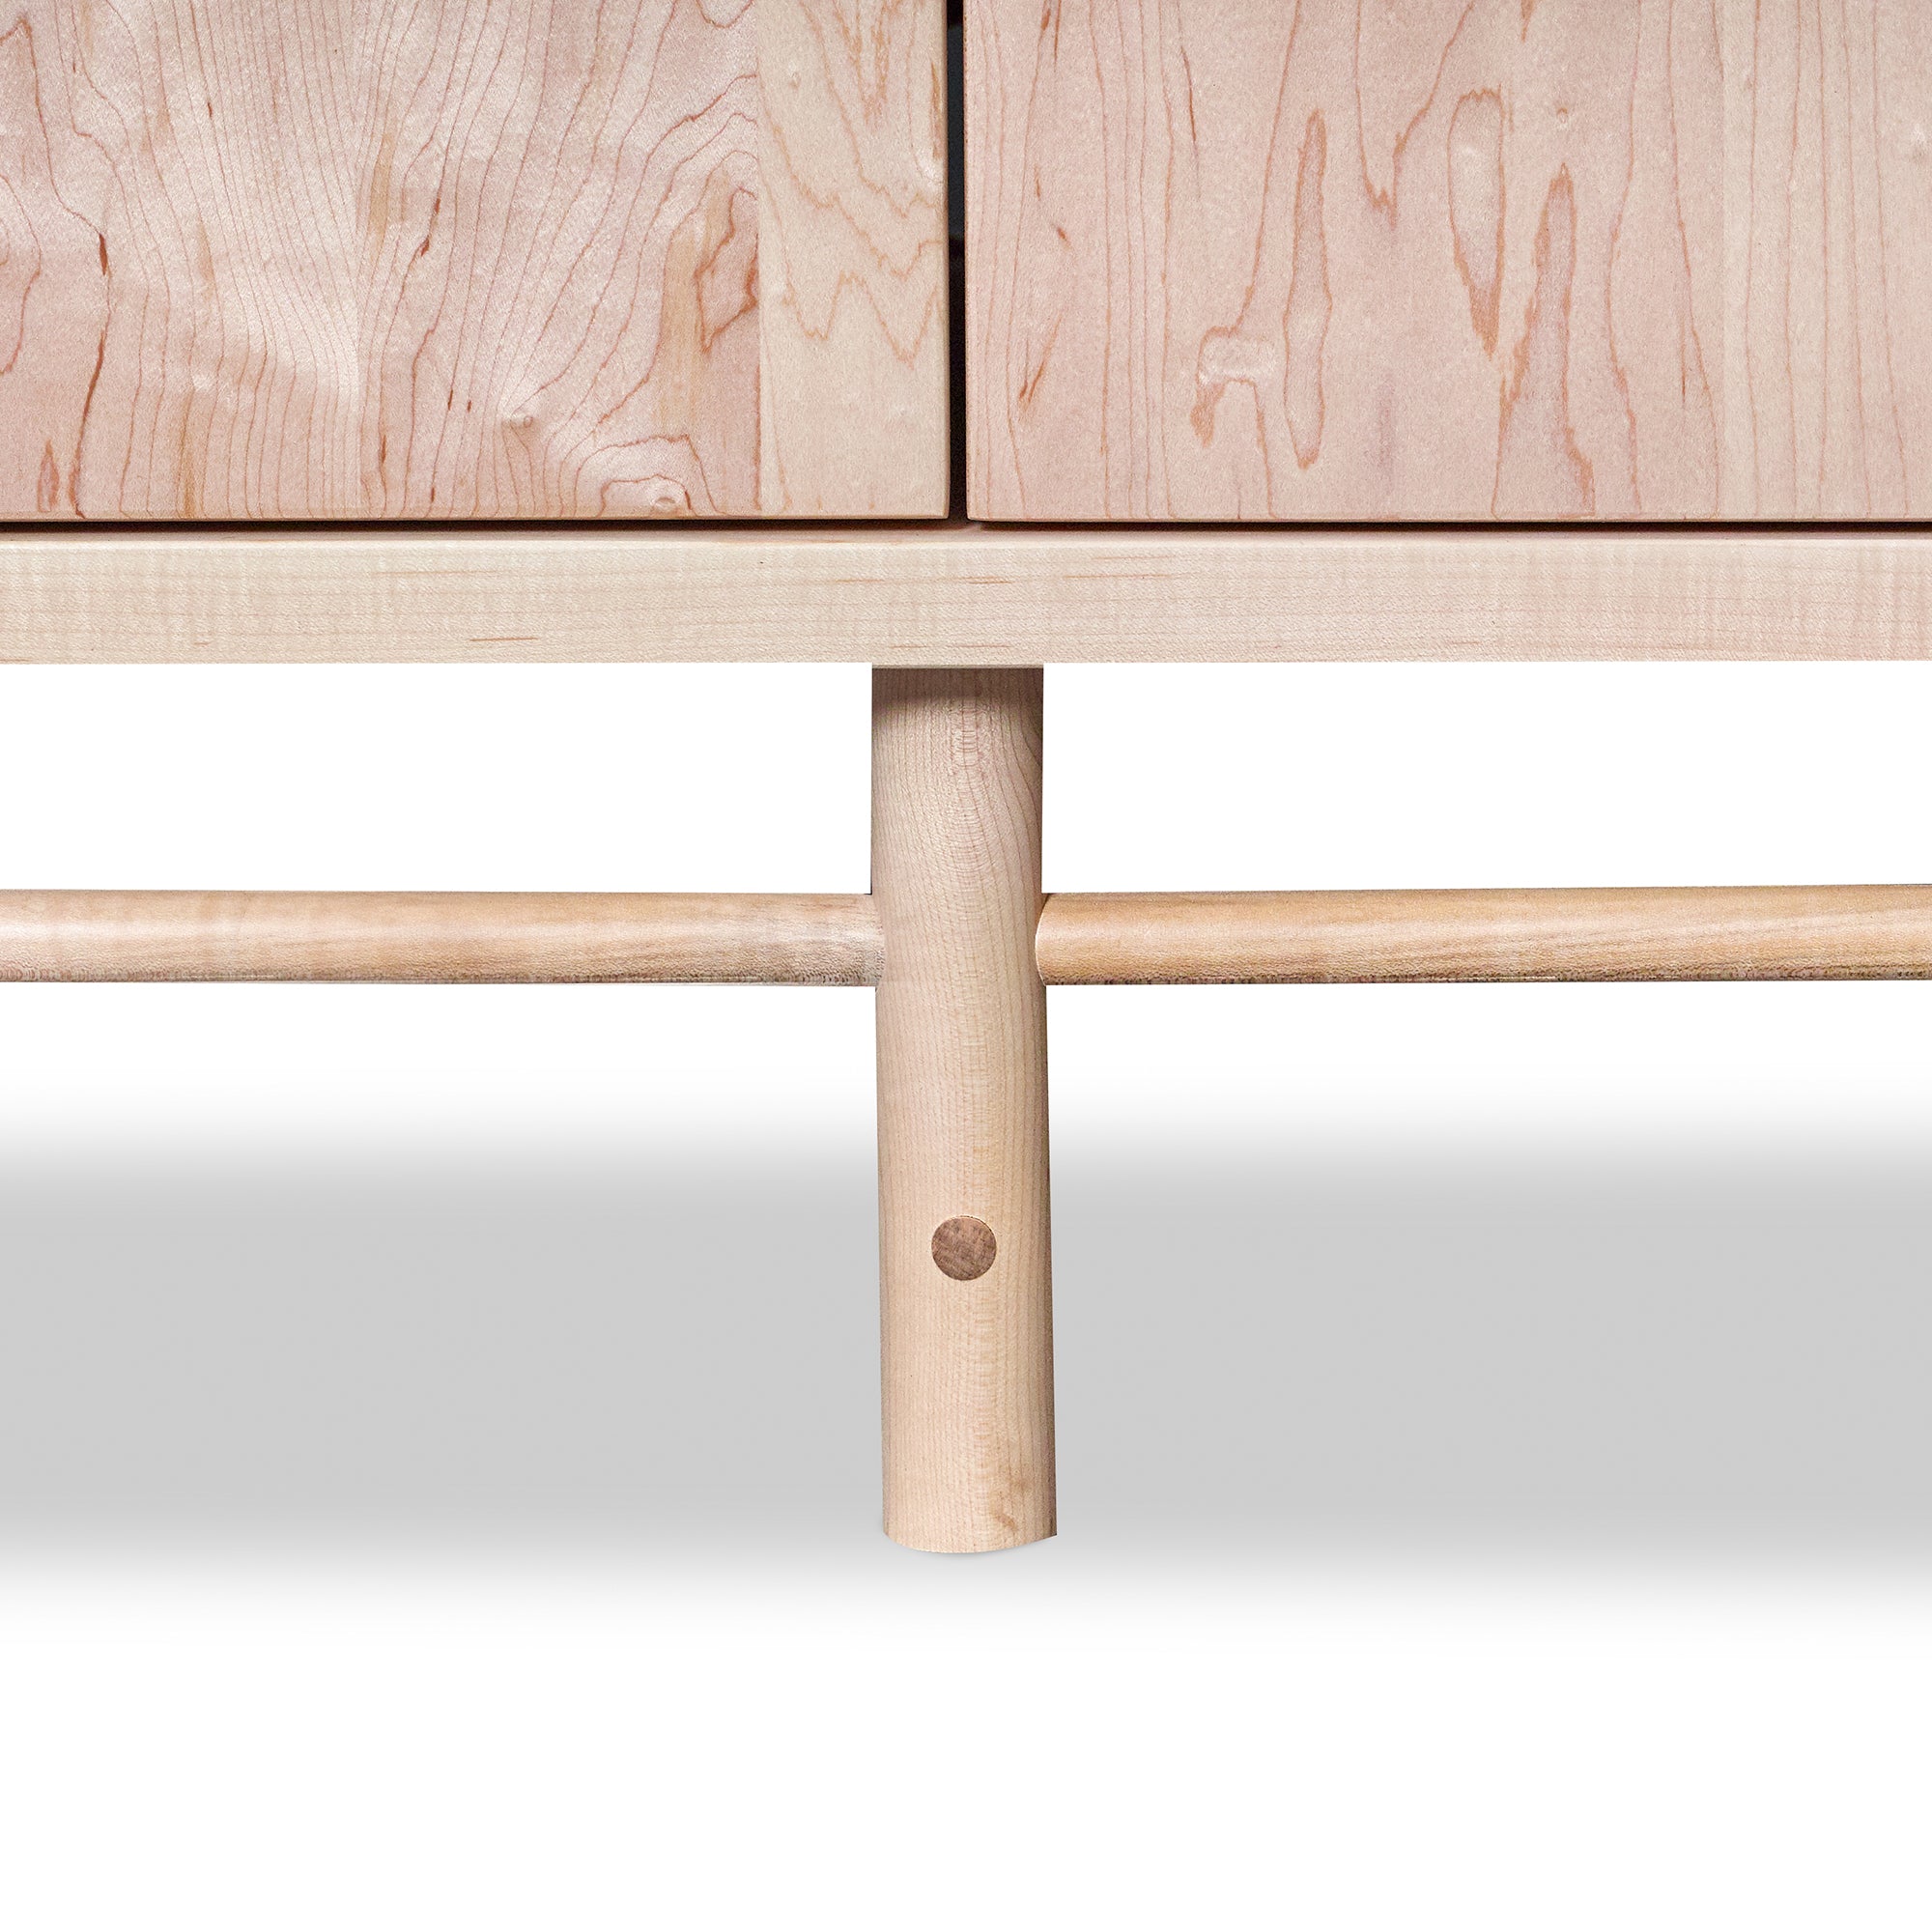 Detail of legs, stretchers and mortise and tenon joinery on solid maple wood Navarend Media Case